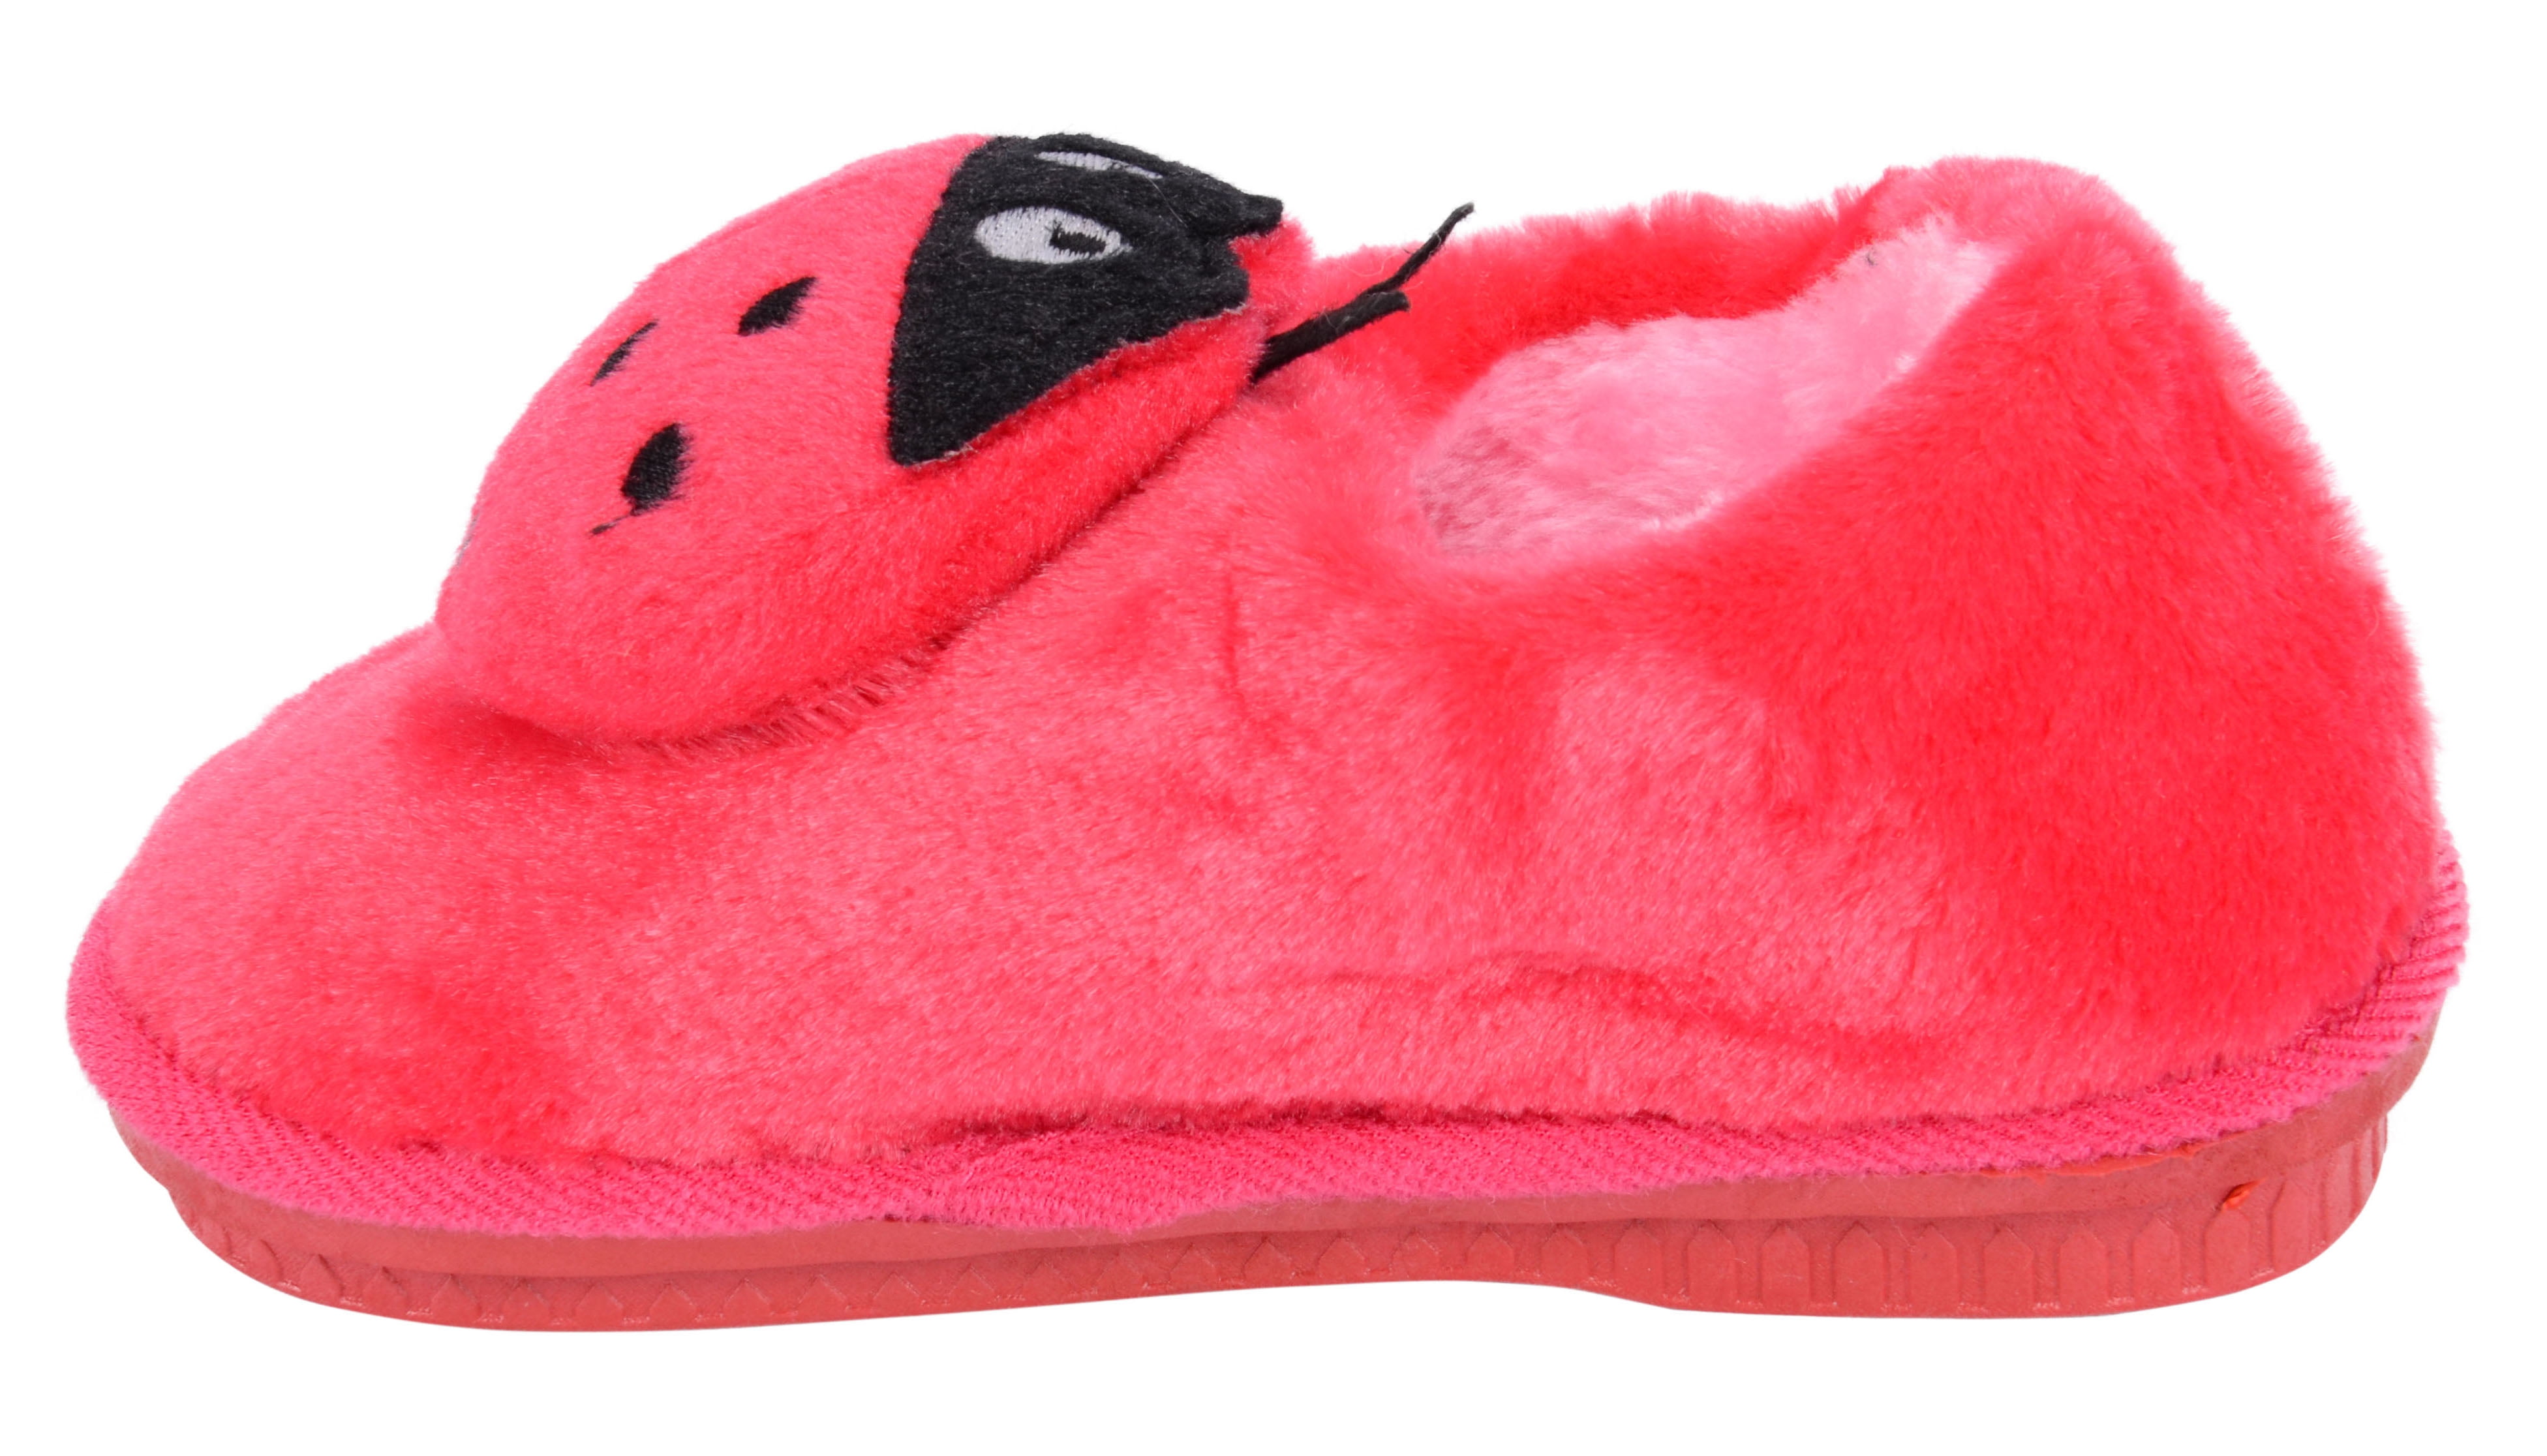 Childrens Animated Ladybird Slippers Size UK 12-2 For Childrens,FUN and Comfy 